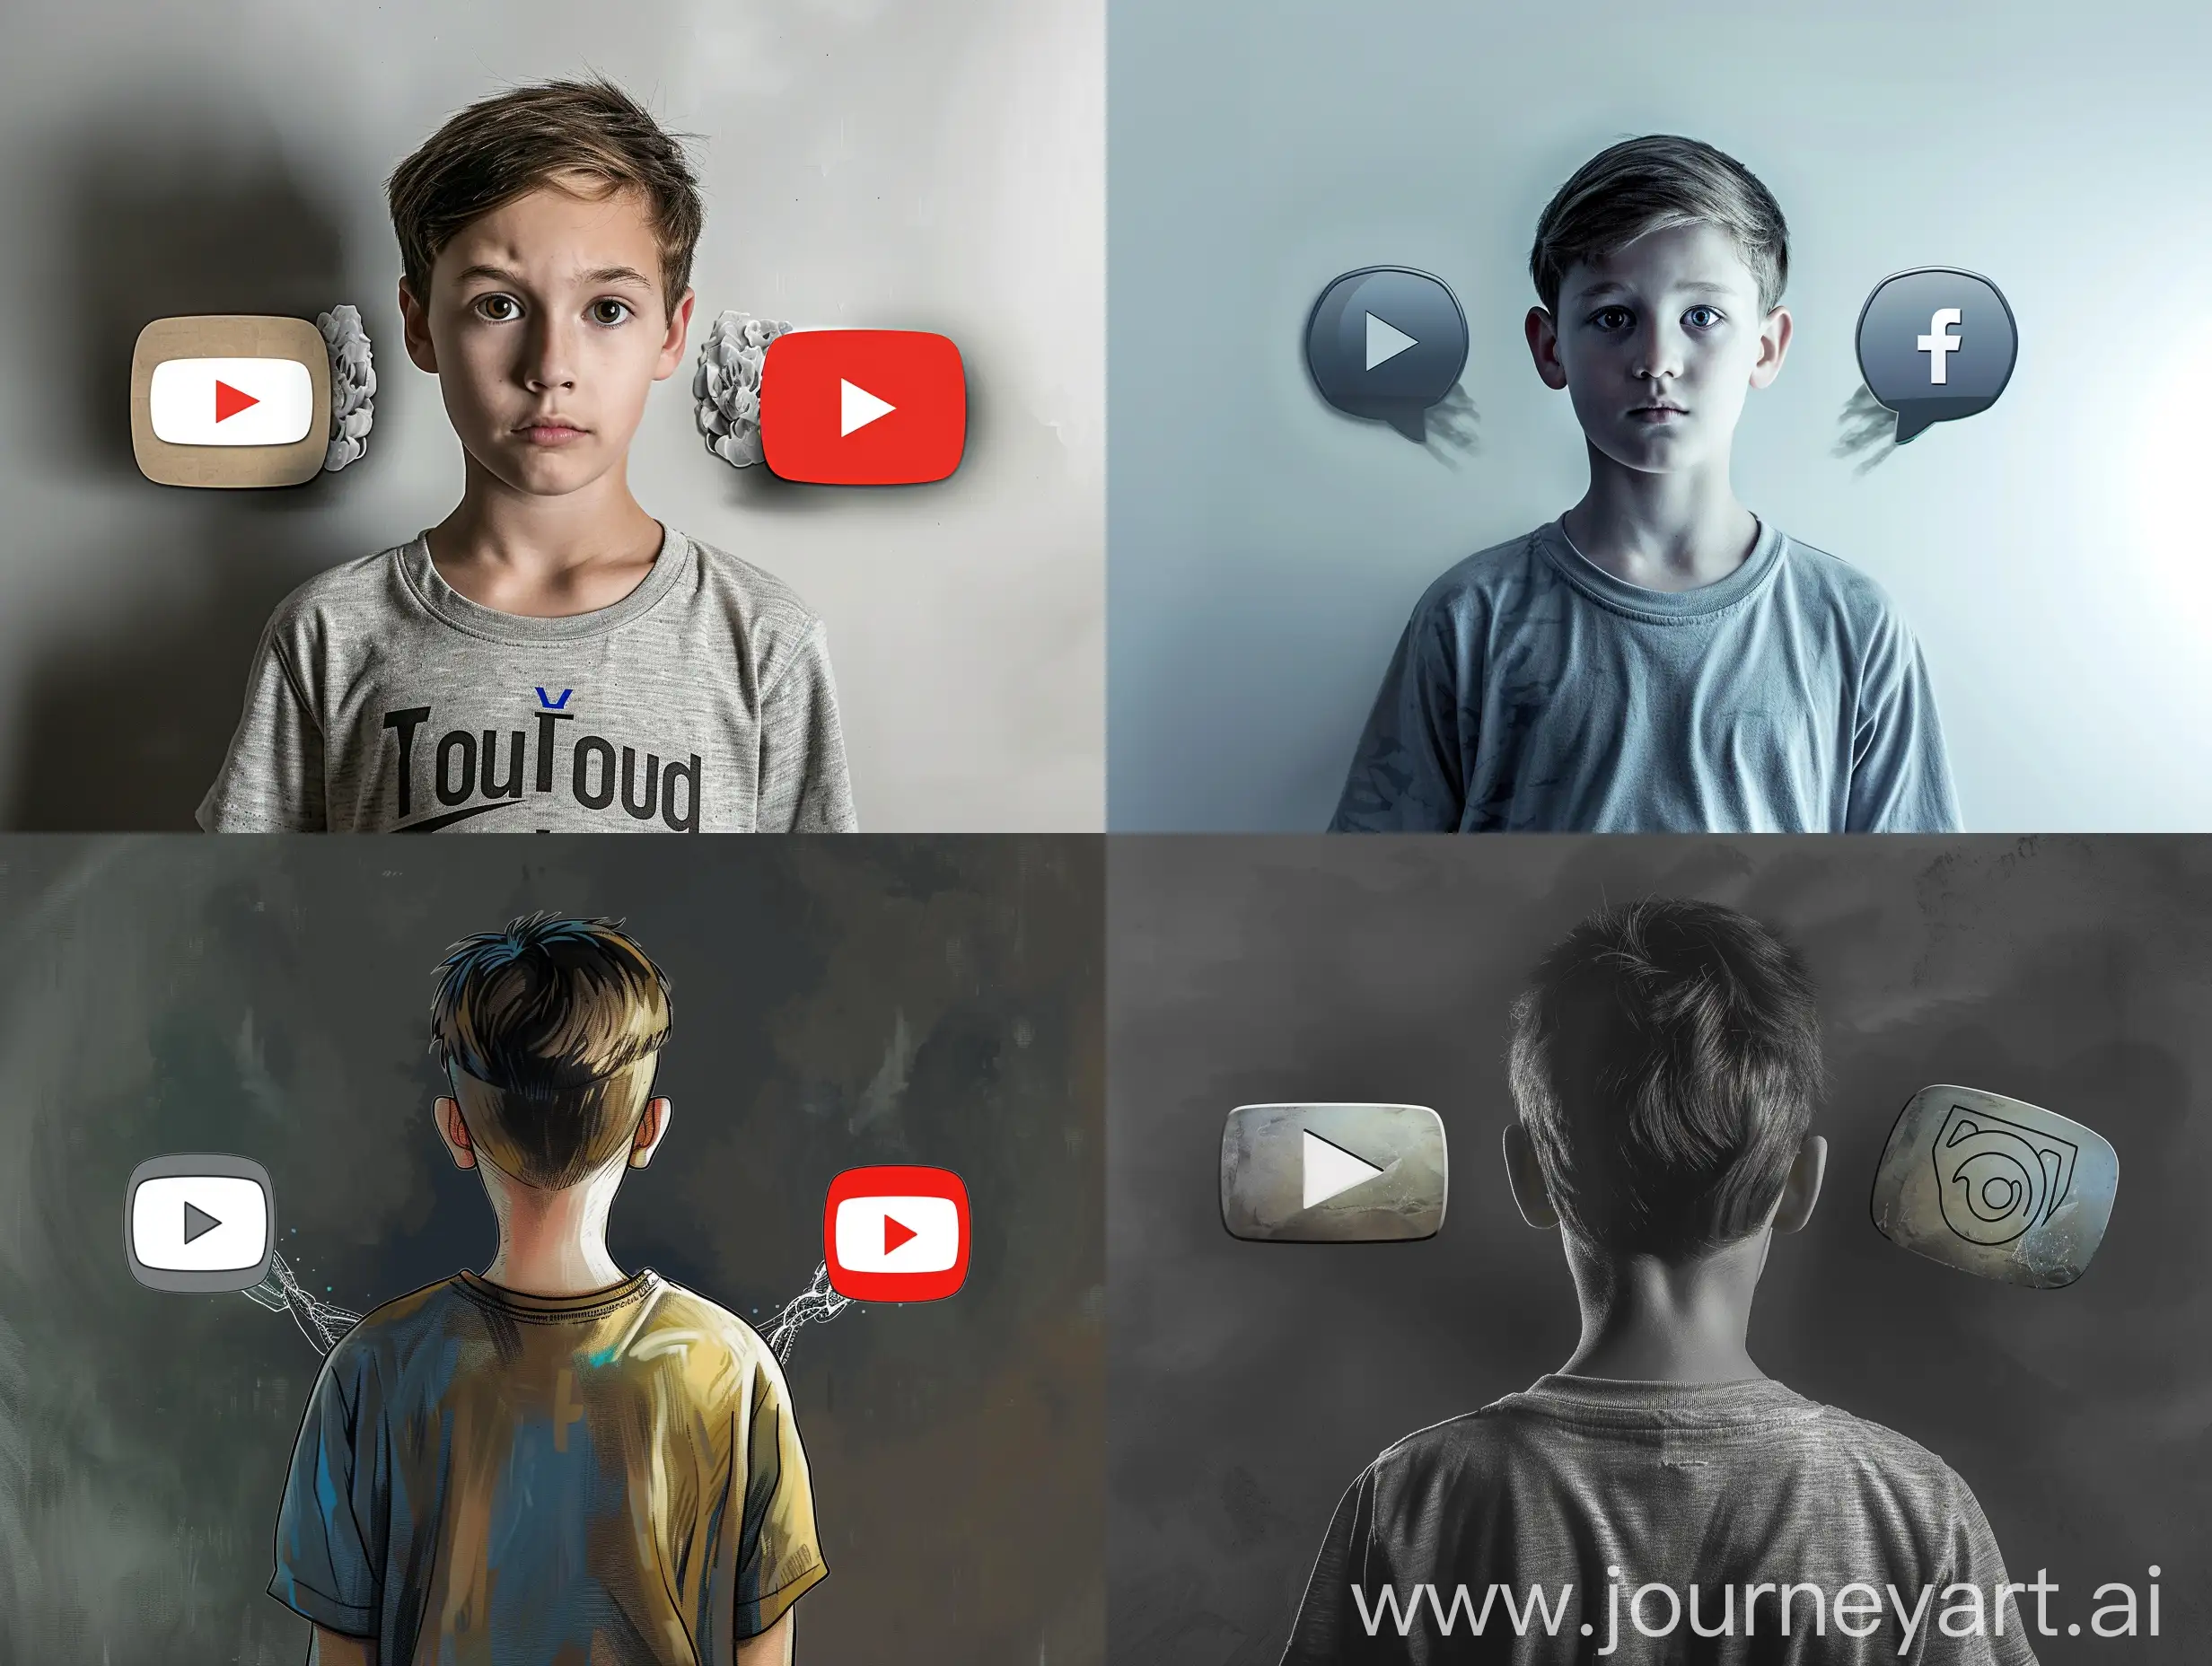 Innovative-YouTube-Logo-Design-with-ForwardLooking-Boy-and-Dual-Dynamic-Logos